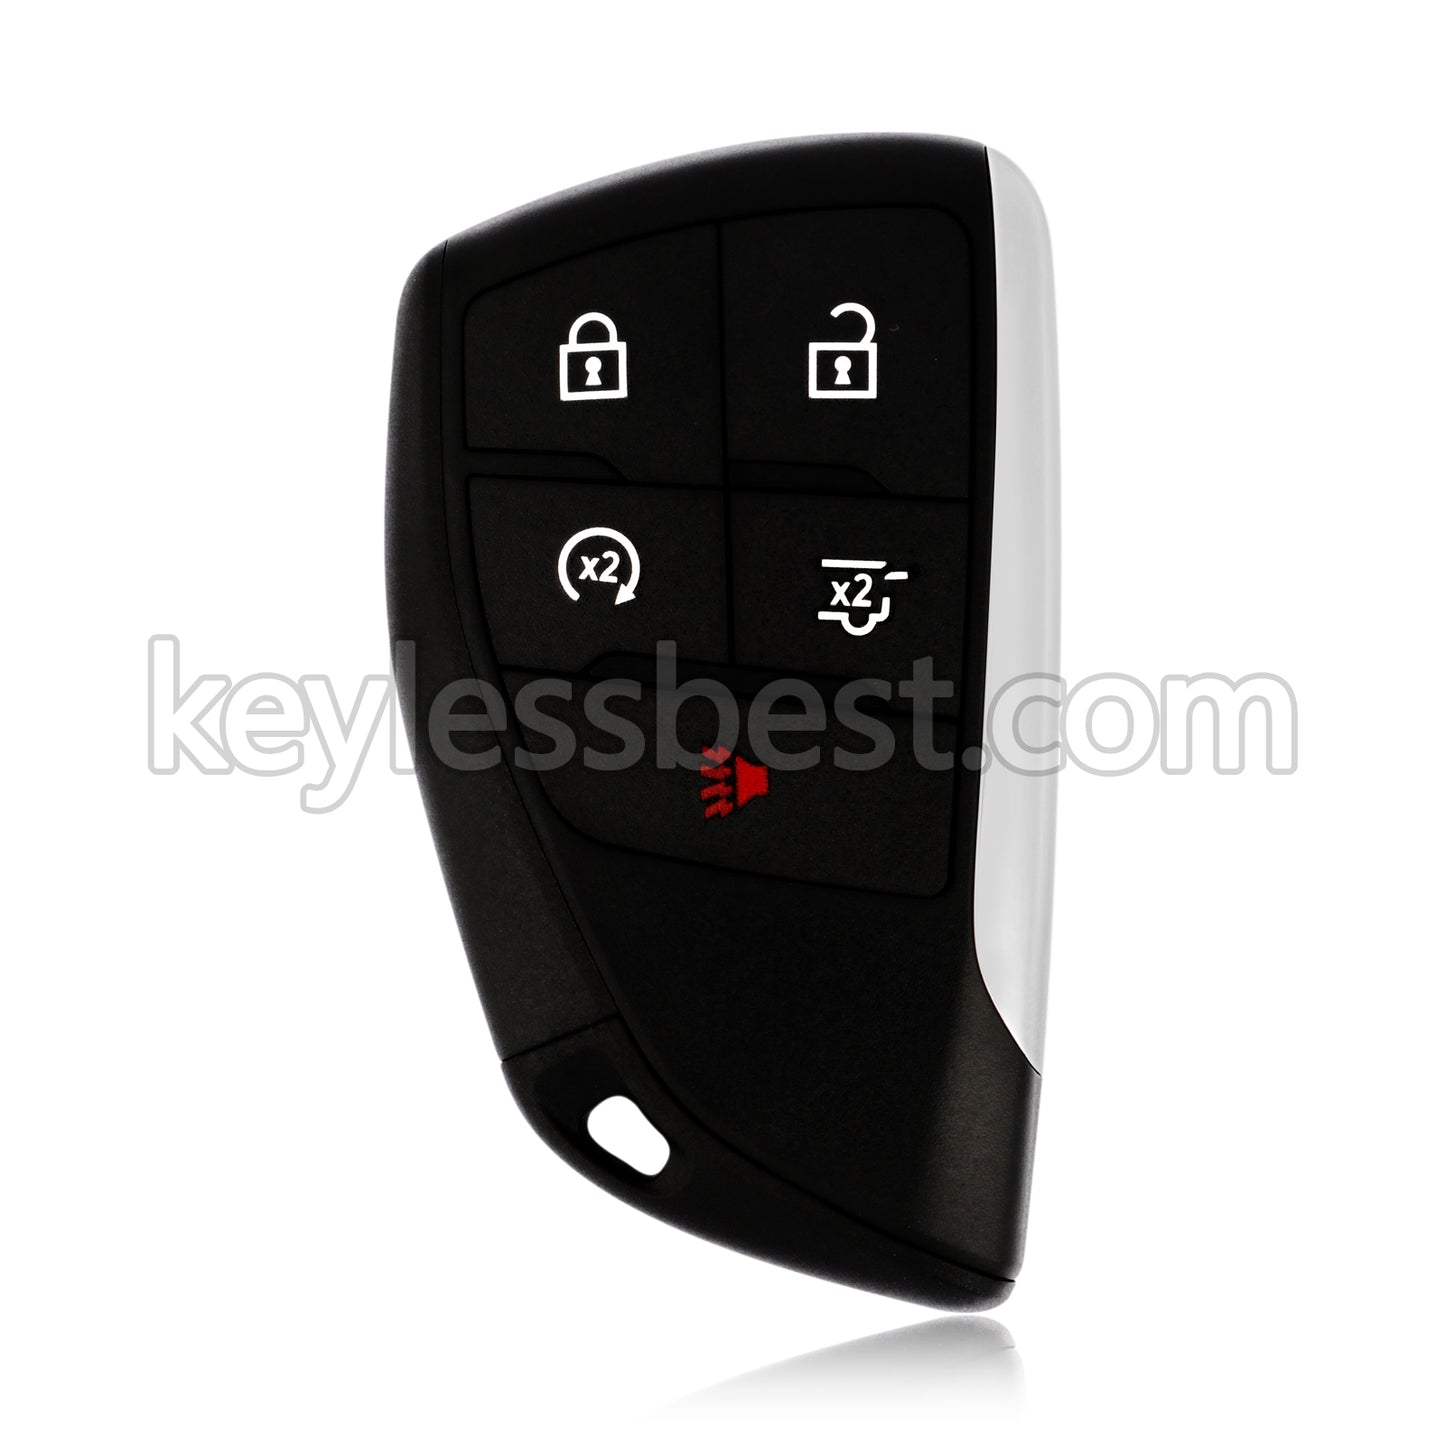 2020 Buick Enclave / 5 Buttons Remote Key / YG0G21TB2 / 433MHz